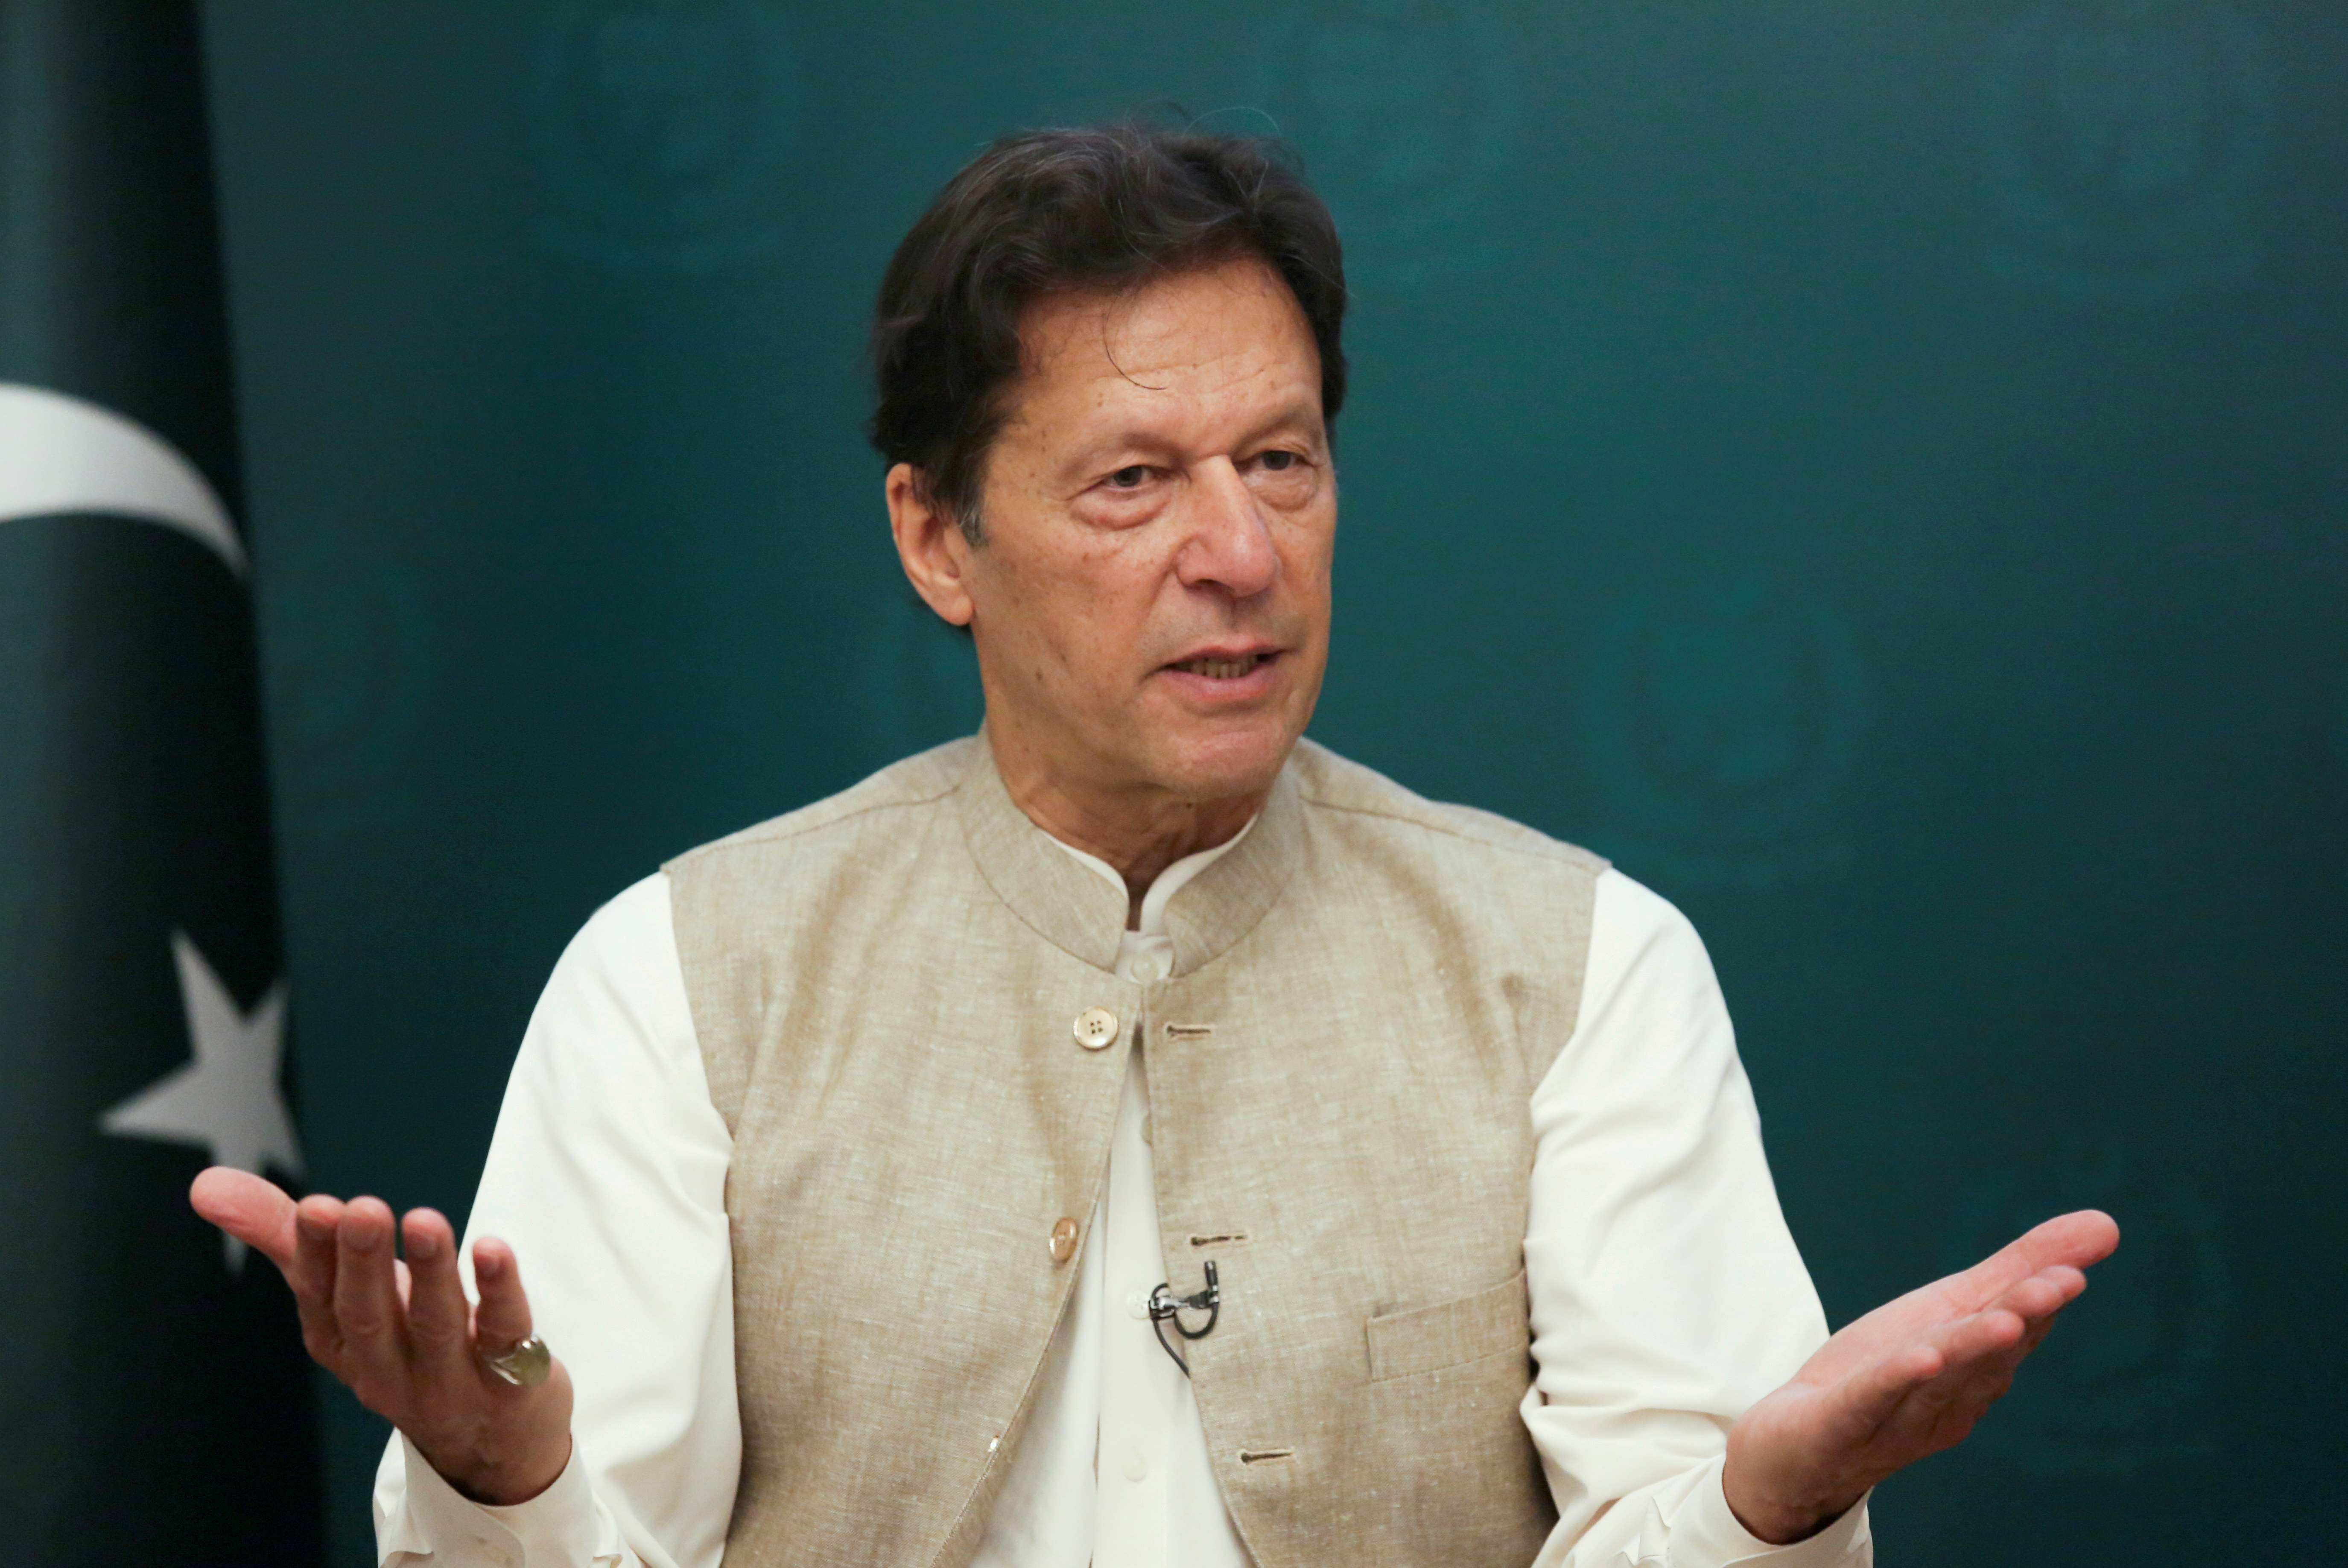 Pakistan's Prime Minister Imran Khan gestures during an interview with Reuters, in Islamabad